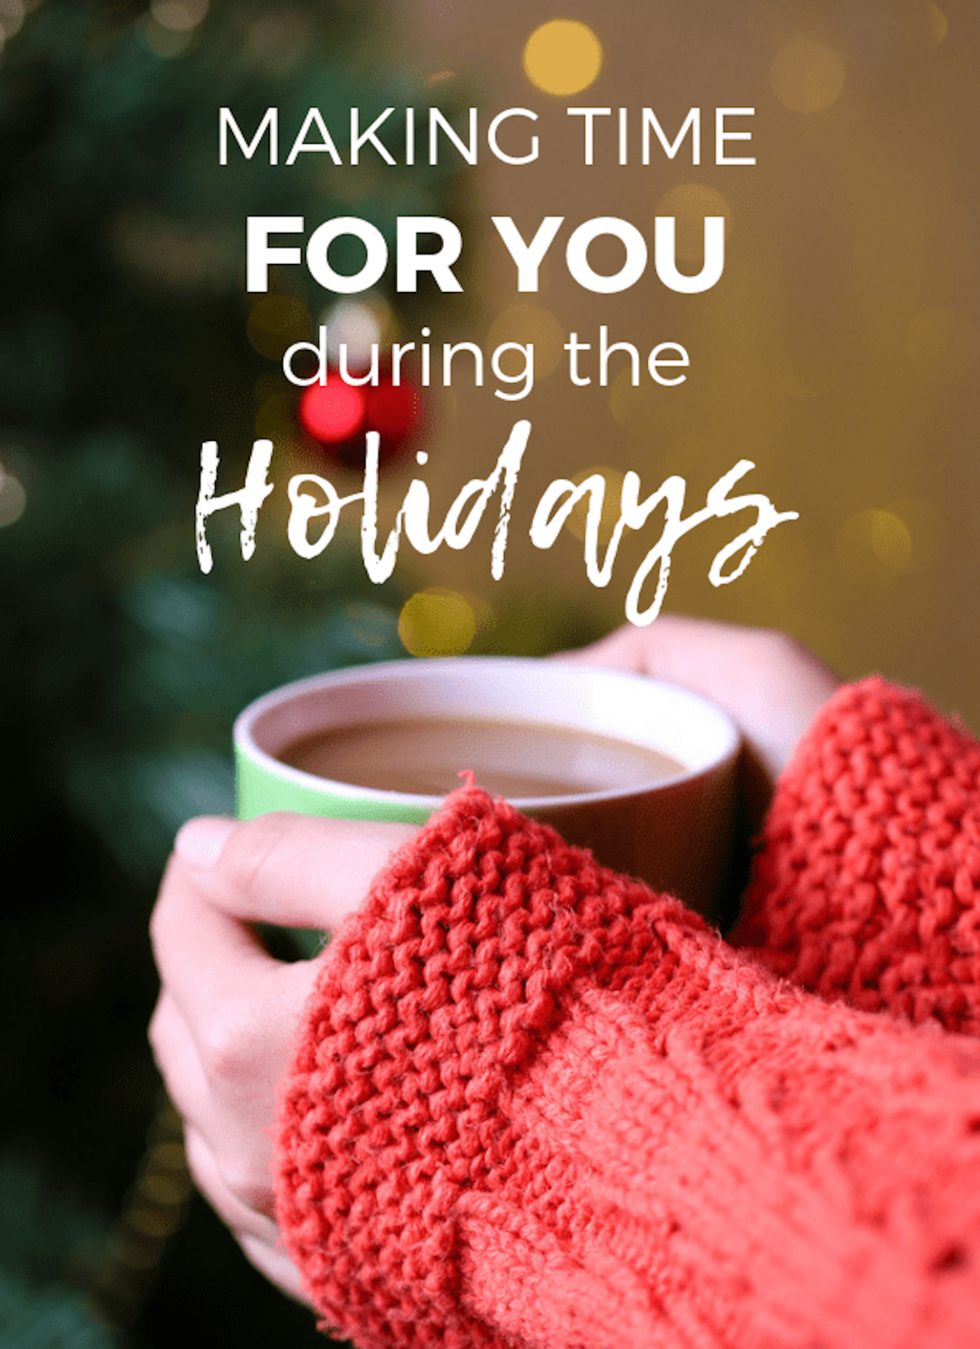 Tips for Holiday Self-Care